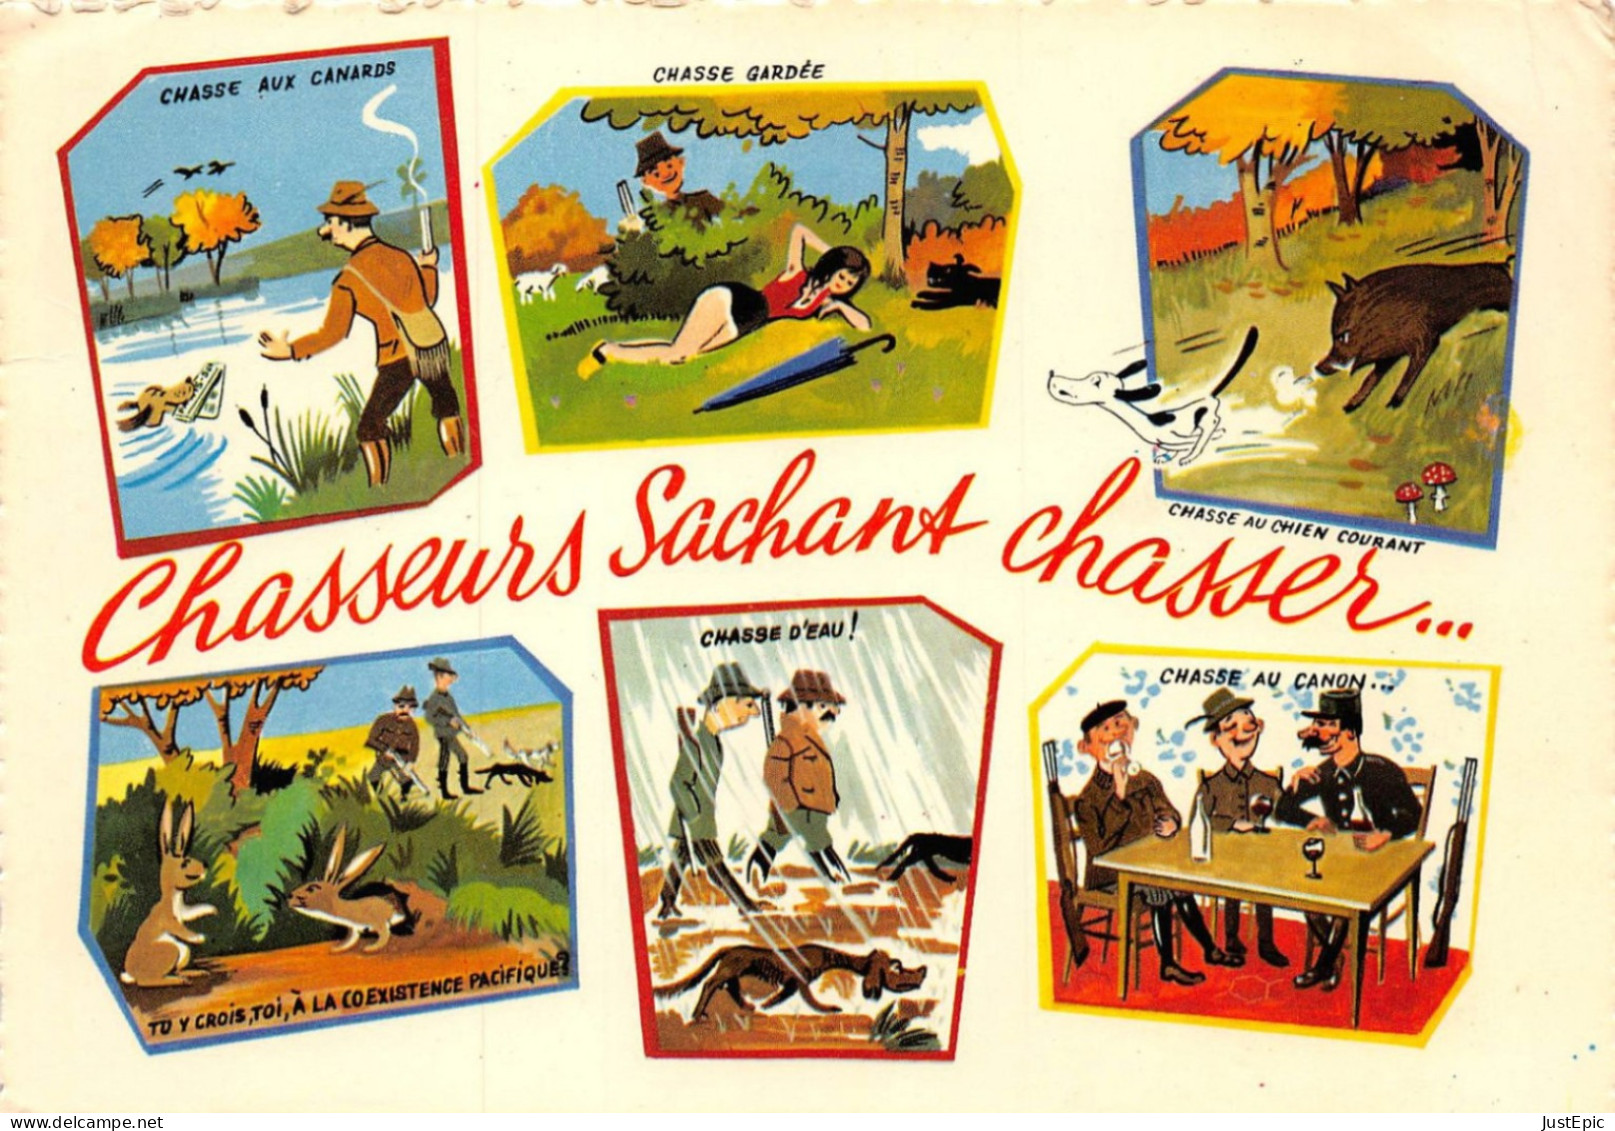 Chasseurs Sachant Chasser ... # Chasse # Cpsm GF 1968 - Humour